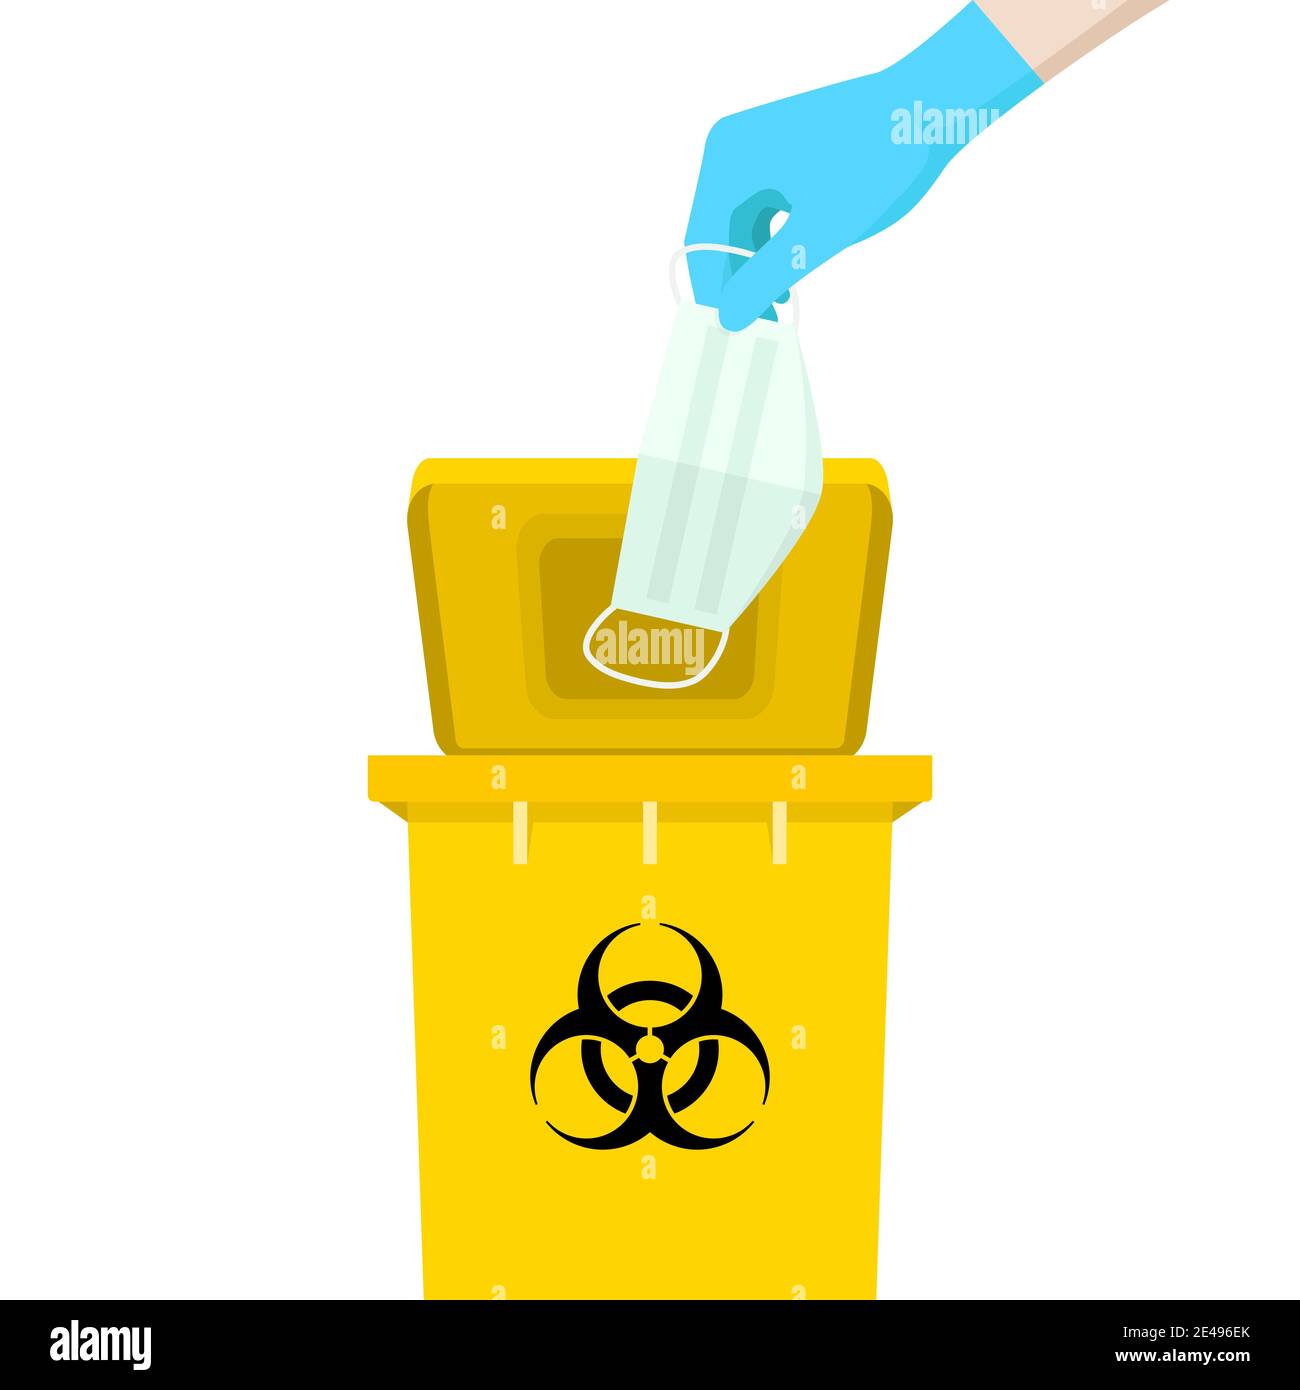 18,808 Yellow Waste Bag Images, Stock Photos, 3D objects